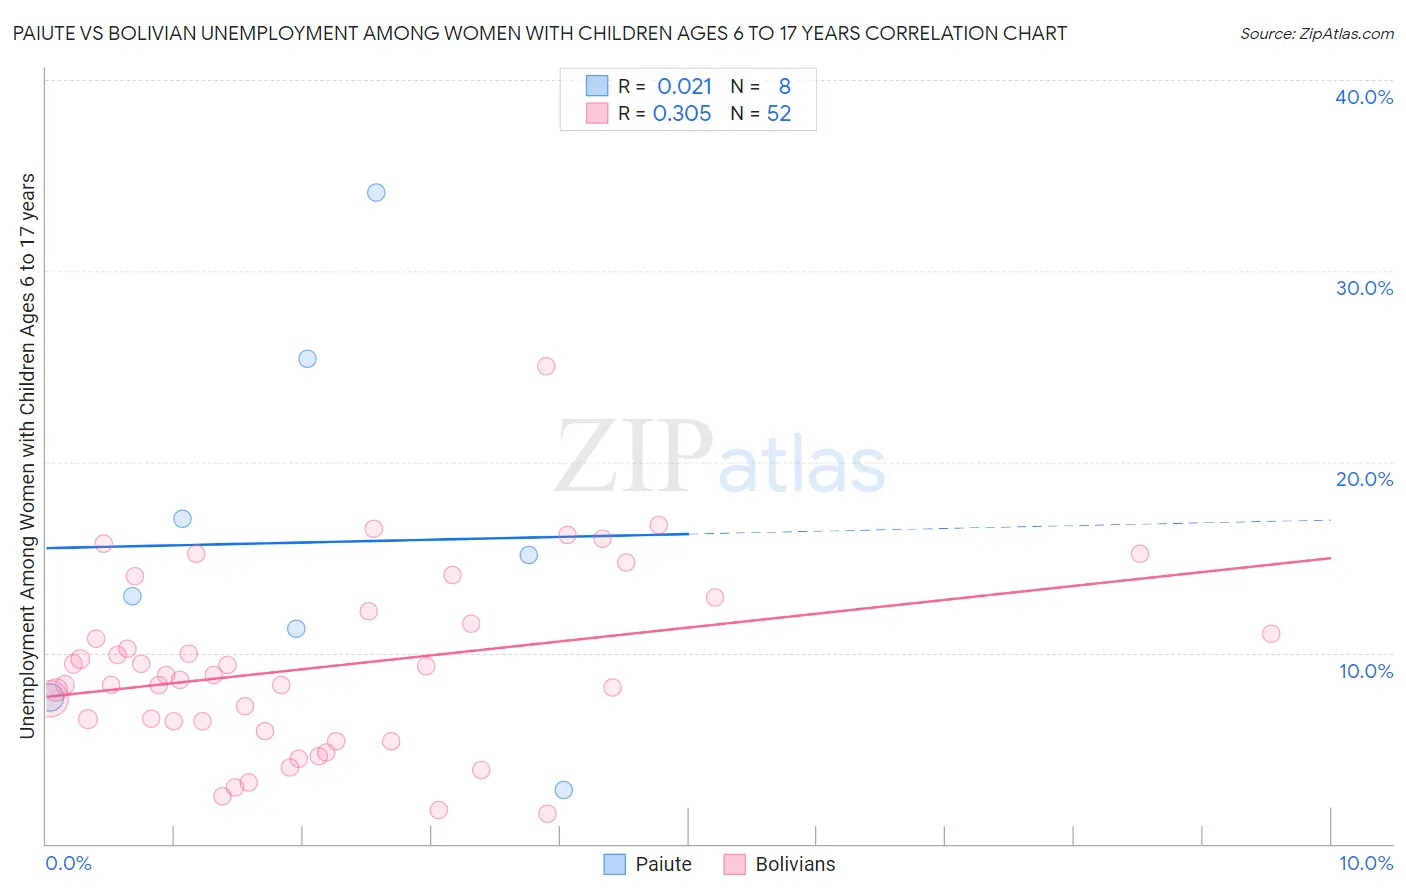 Paiute vs Bolivian Unemployment Among Women with Children Ages 6 to 17 years